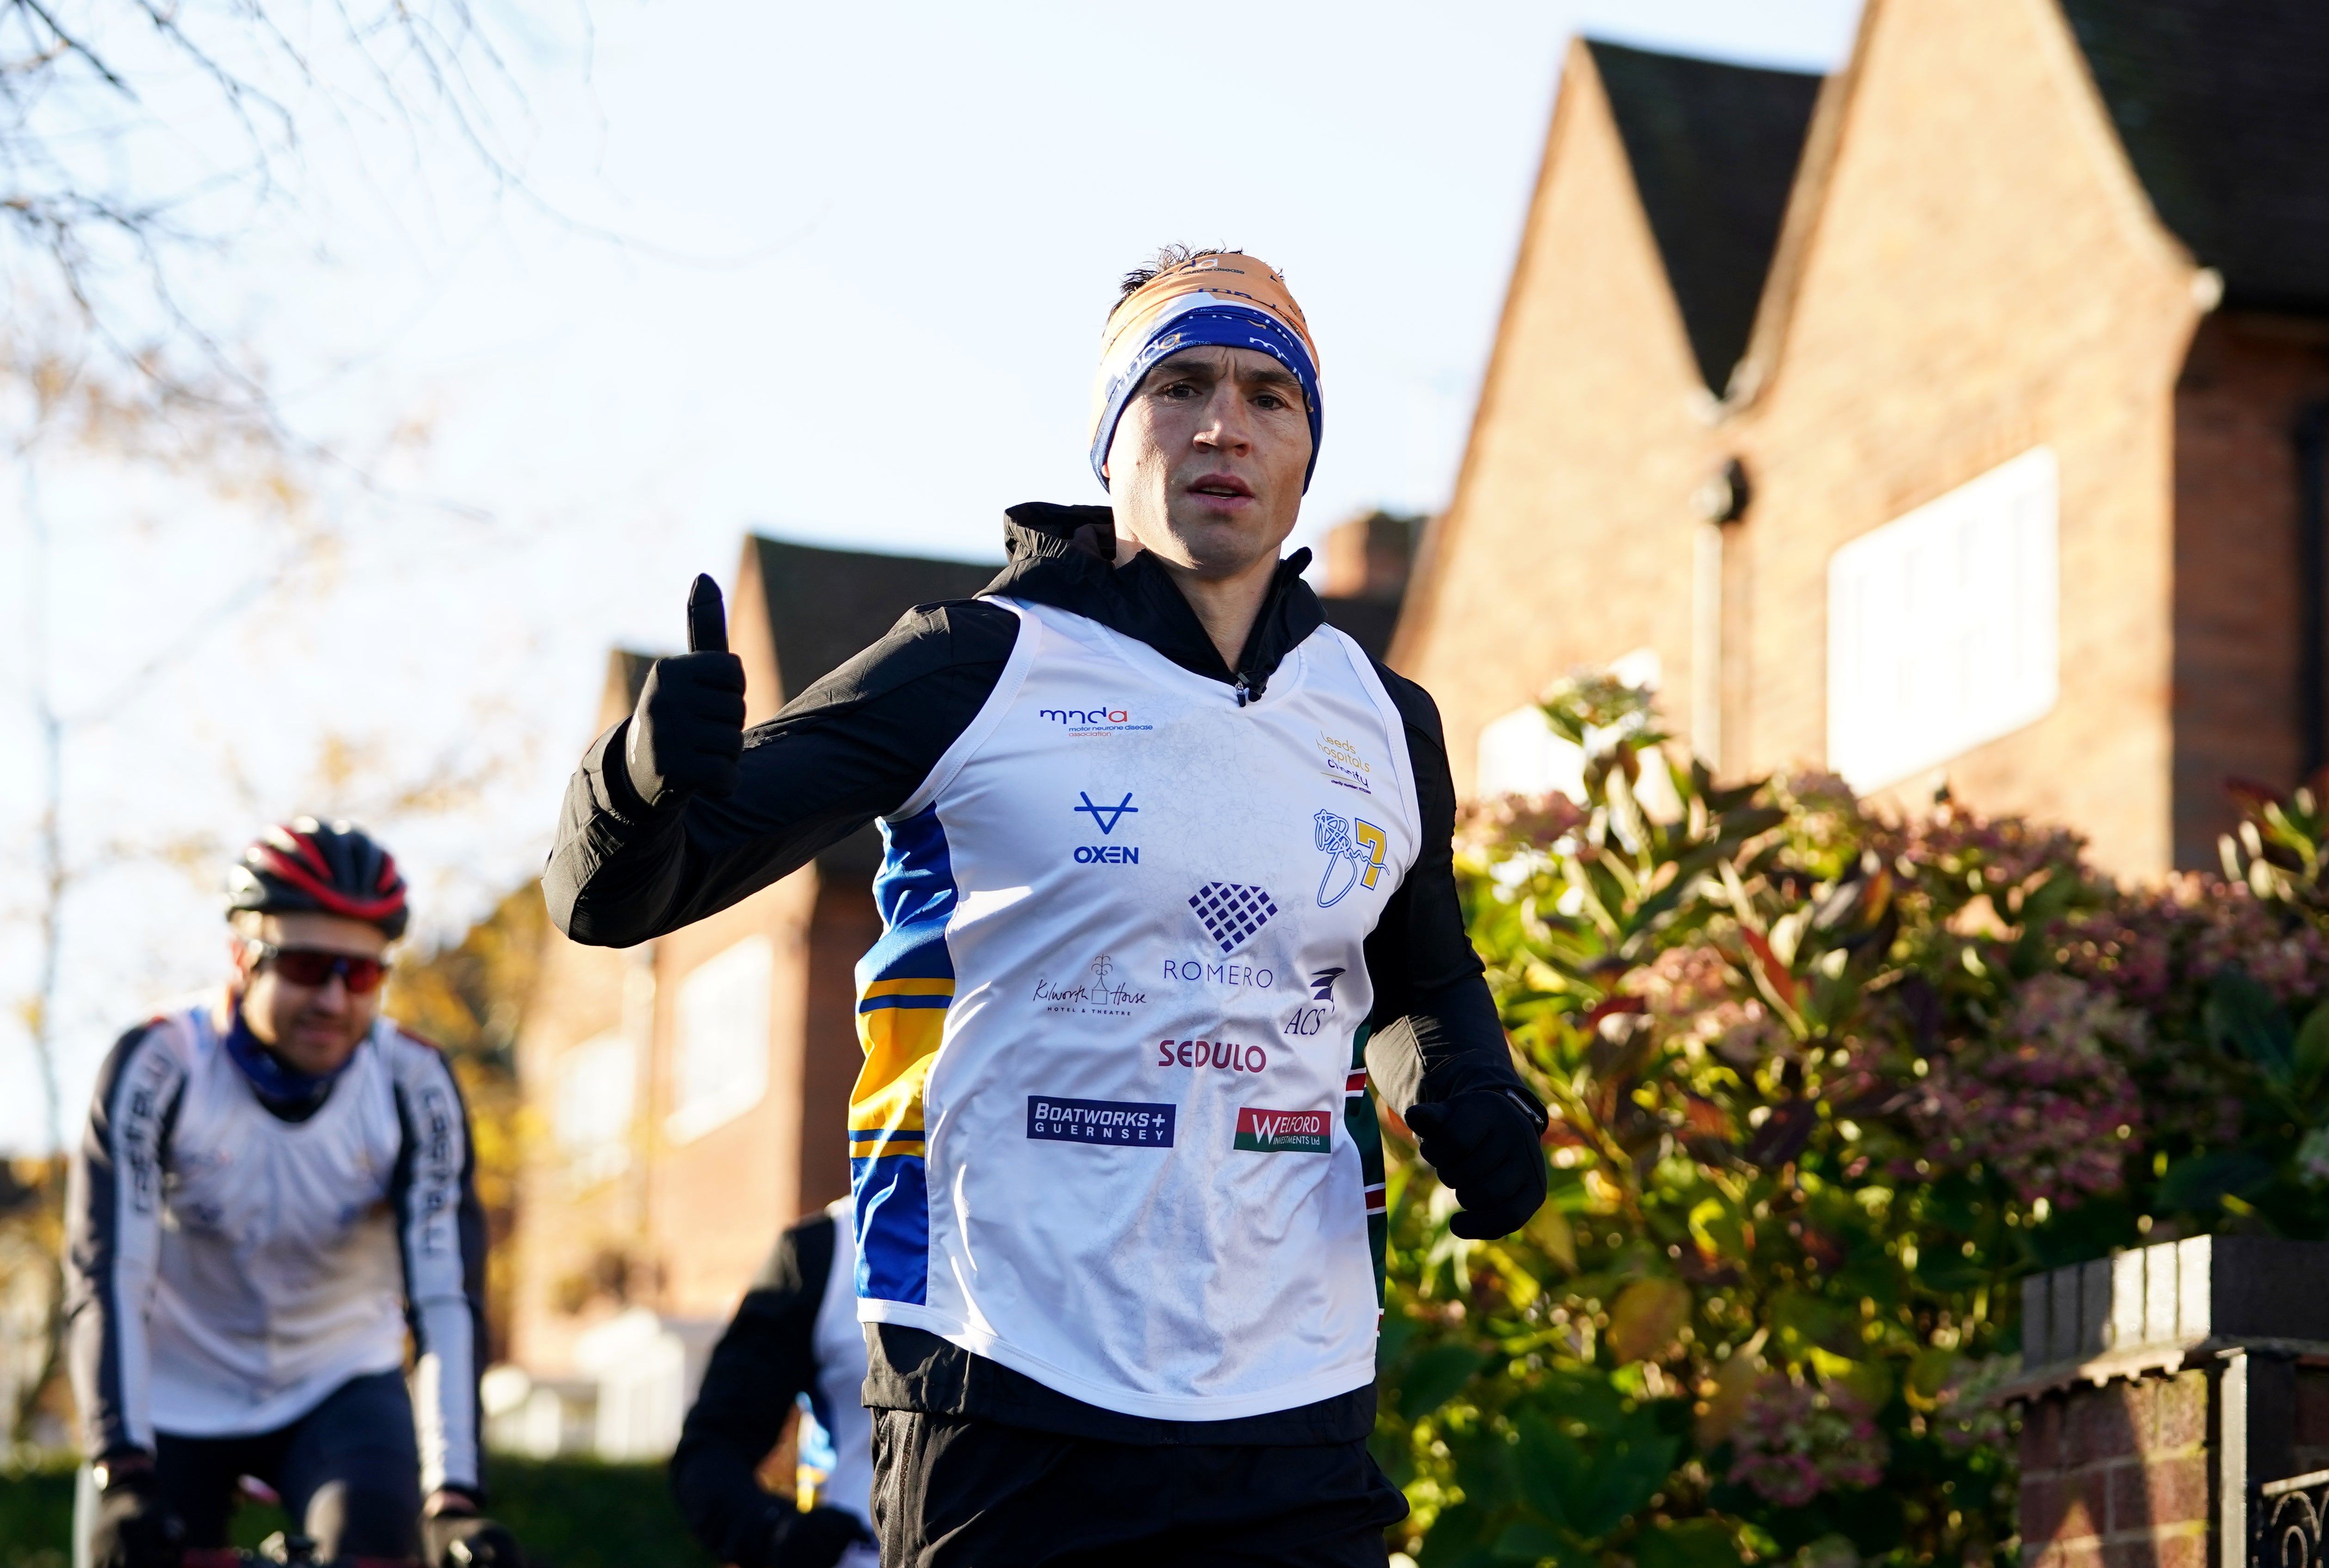 Kevin Sinfield set off on his latest remarkable fundraising challenge (Zac Goodwin/PA)